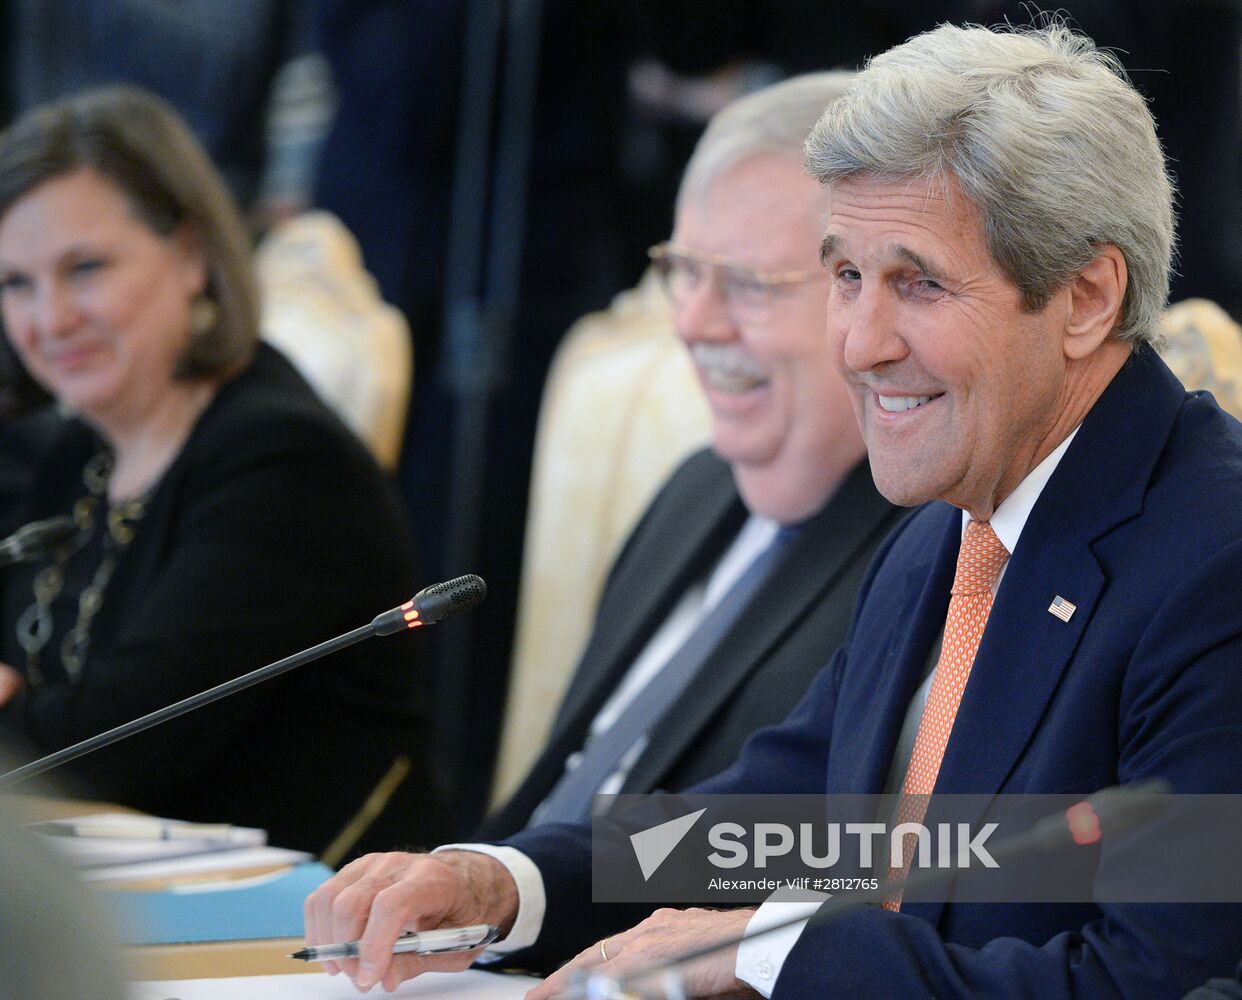 Russian Foreign Minister Sergei Lavrov meets with US Secretary of State John Kerry